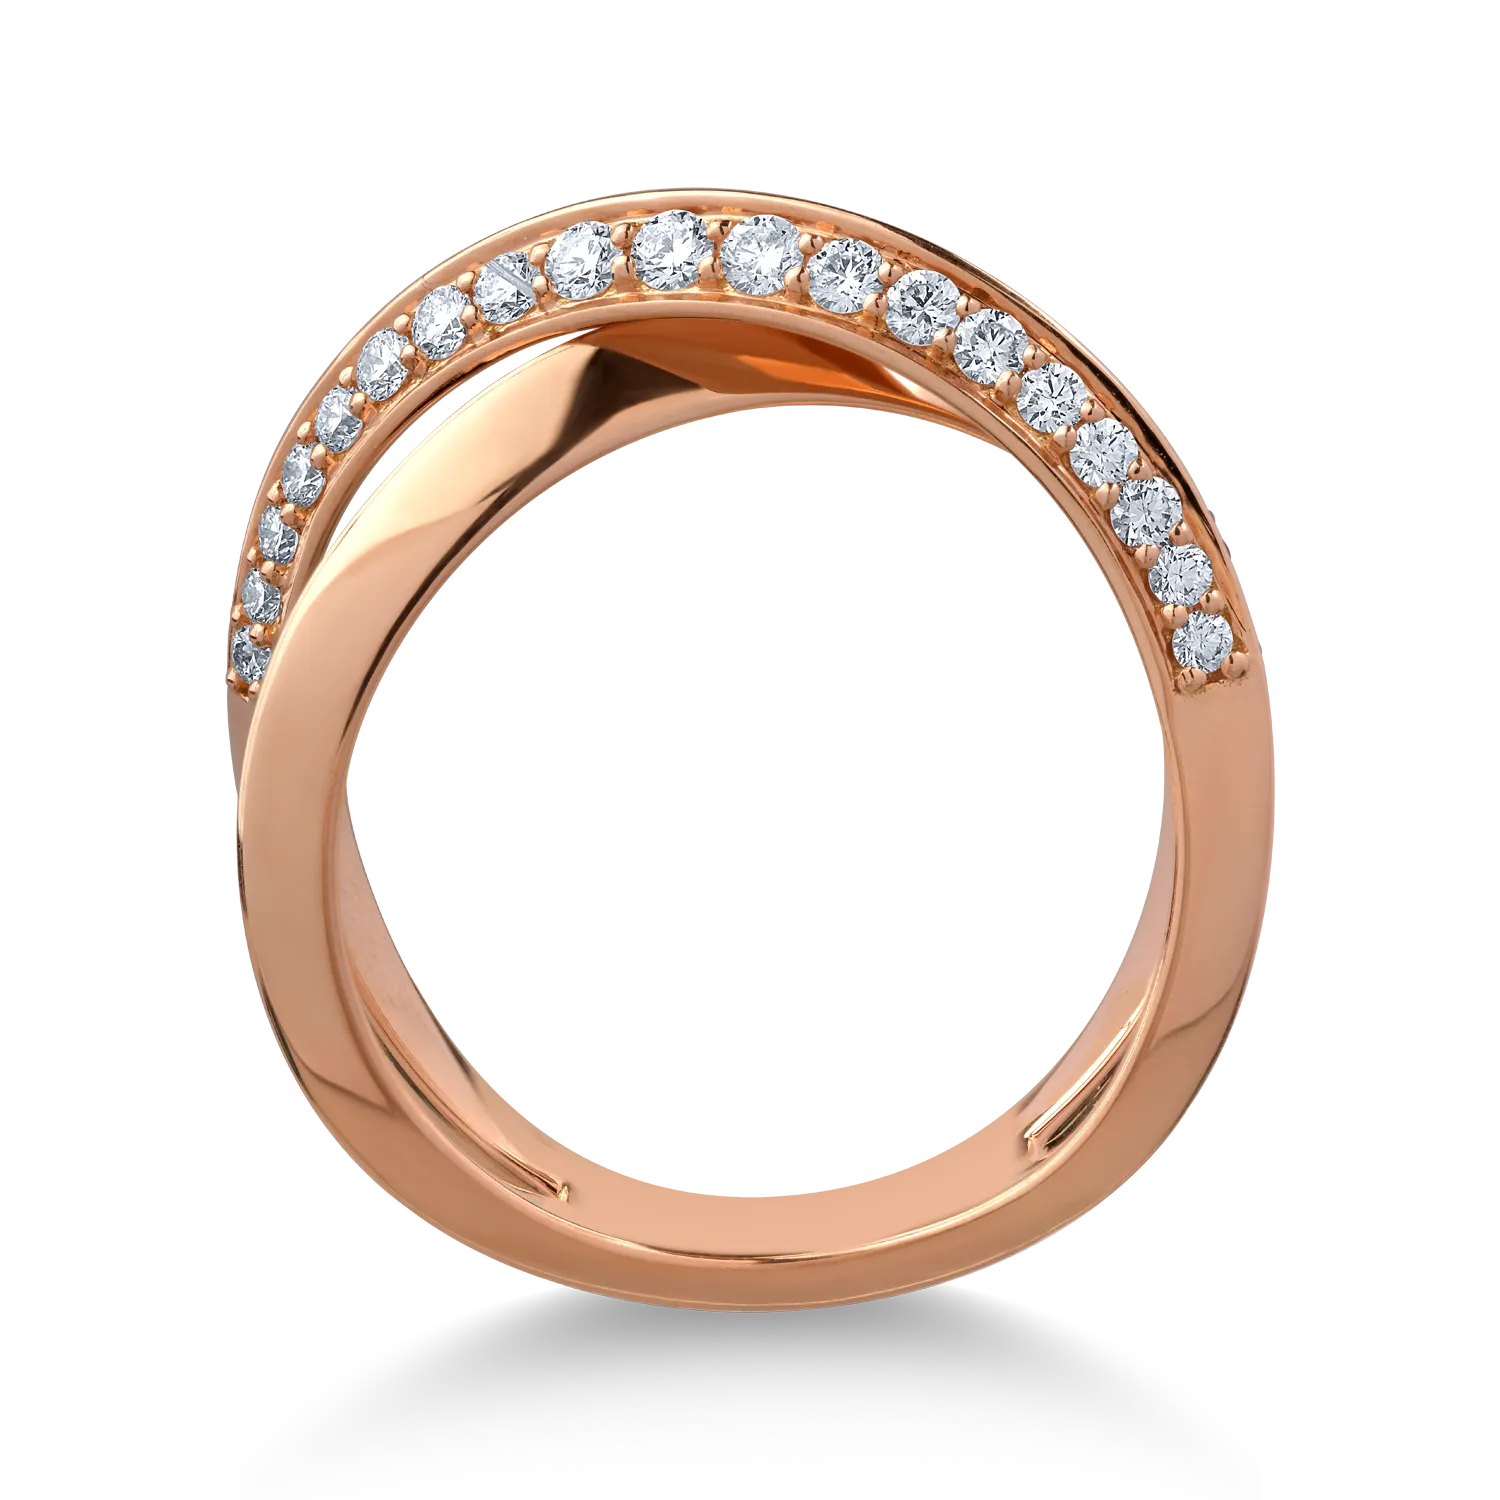 18K rose gold ring with 0.32ct rubies and 0.26ct diamonds